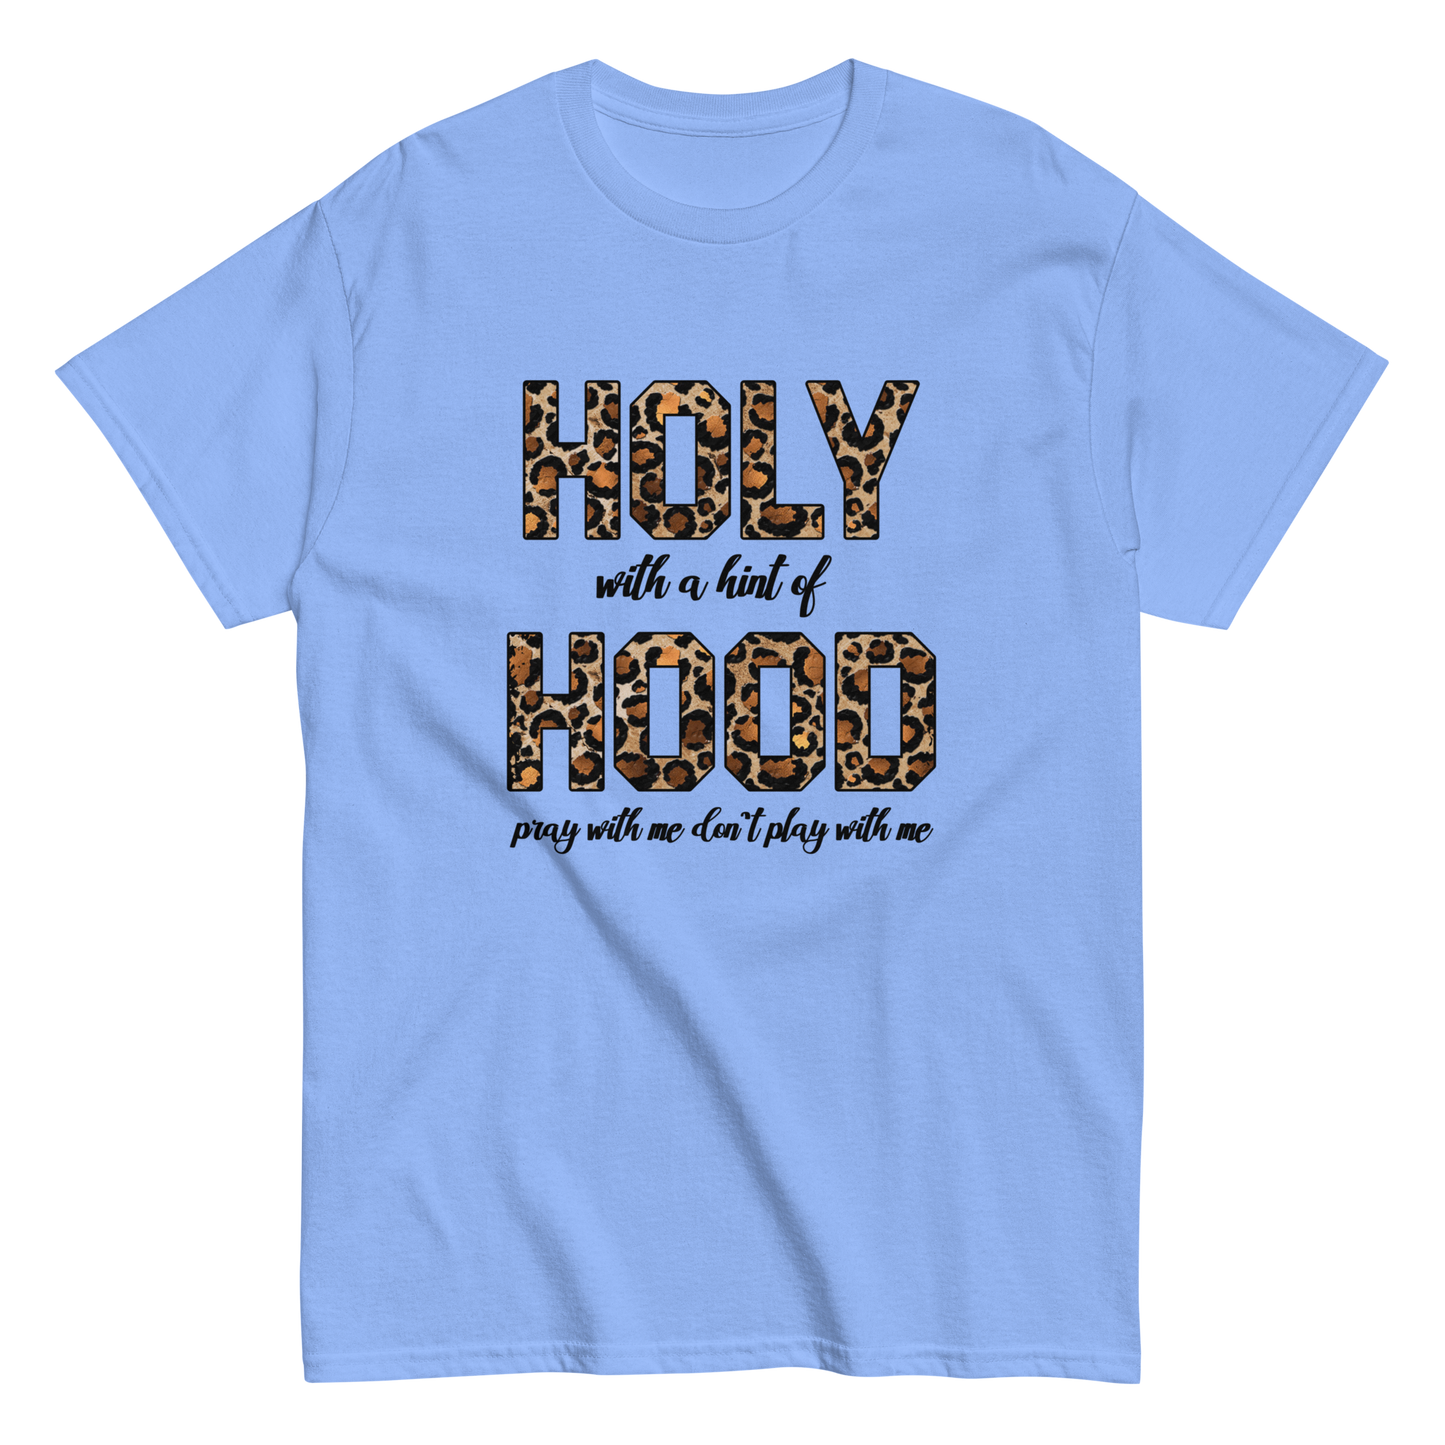 Holy With A Hint Of Hood Pray With Me Don't Play With Me T-Shirt